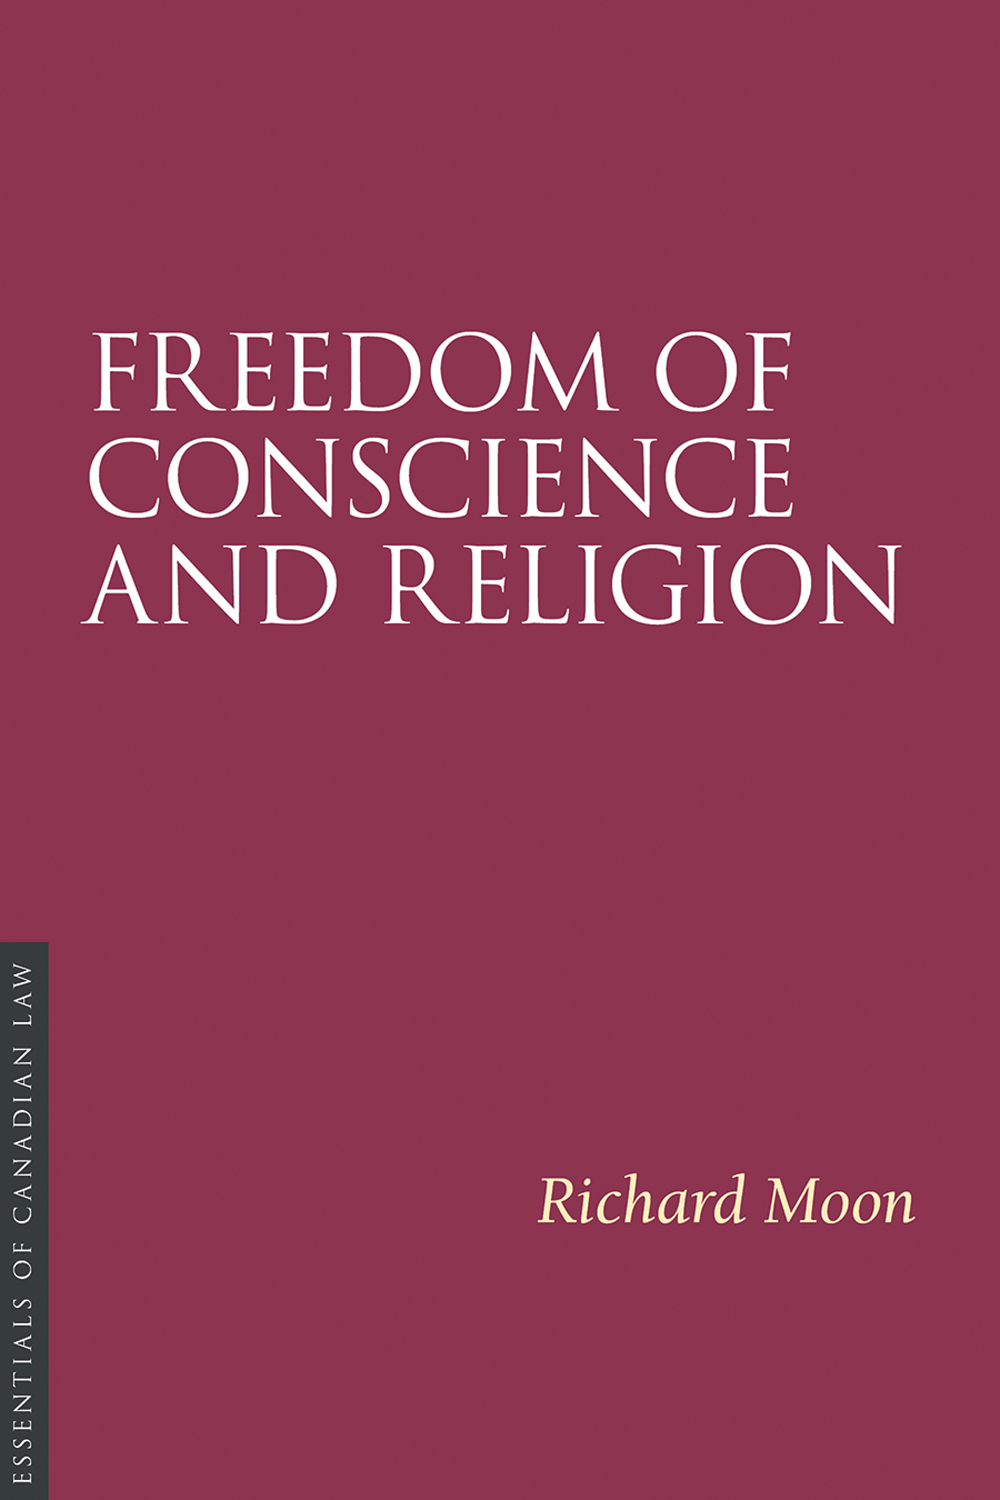 freedom of thought conscience and religion essay